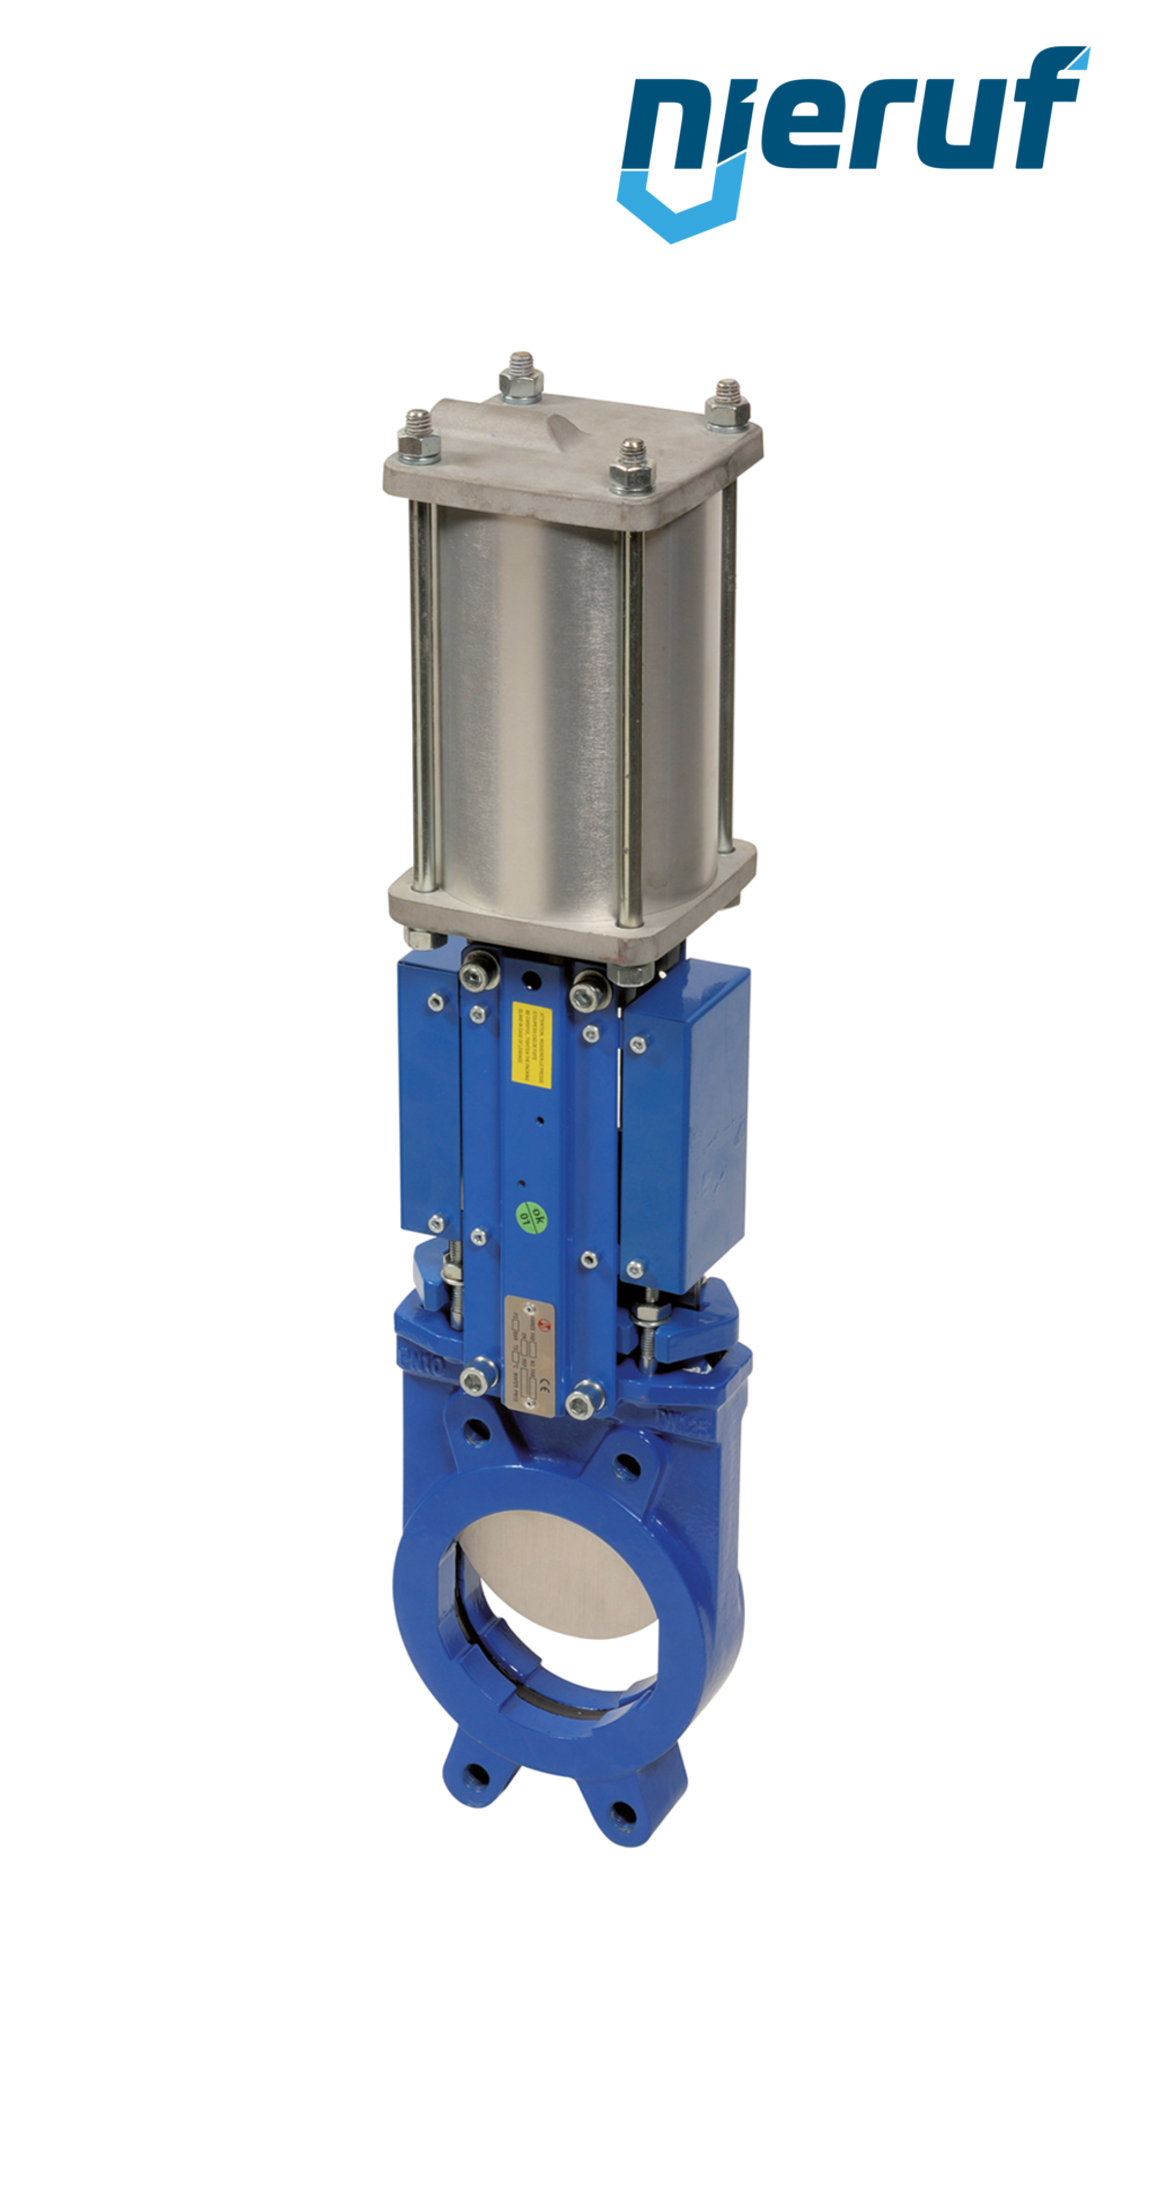 Knife gate valve DN 50 SR01 EPDM pneumatic actuation double acting